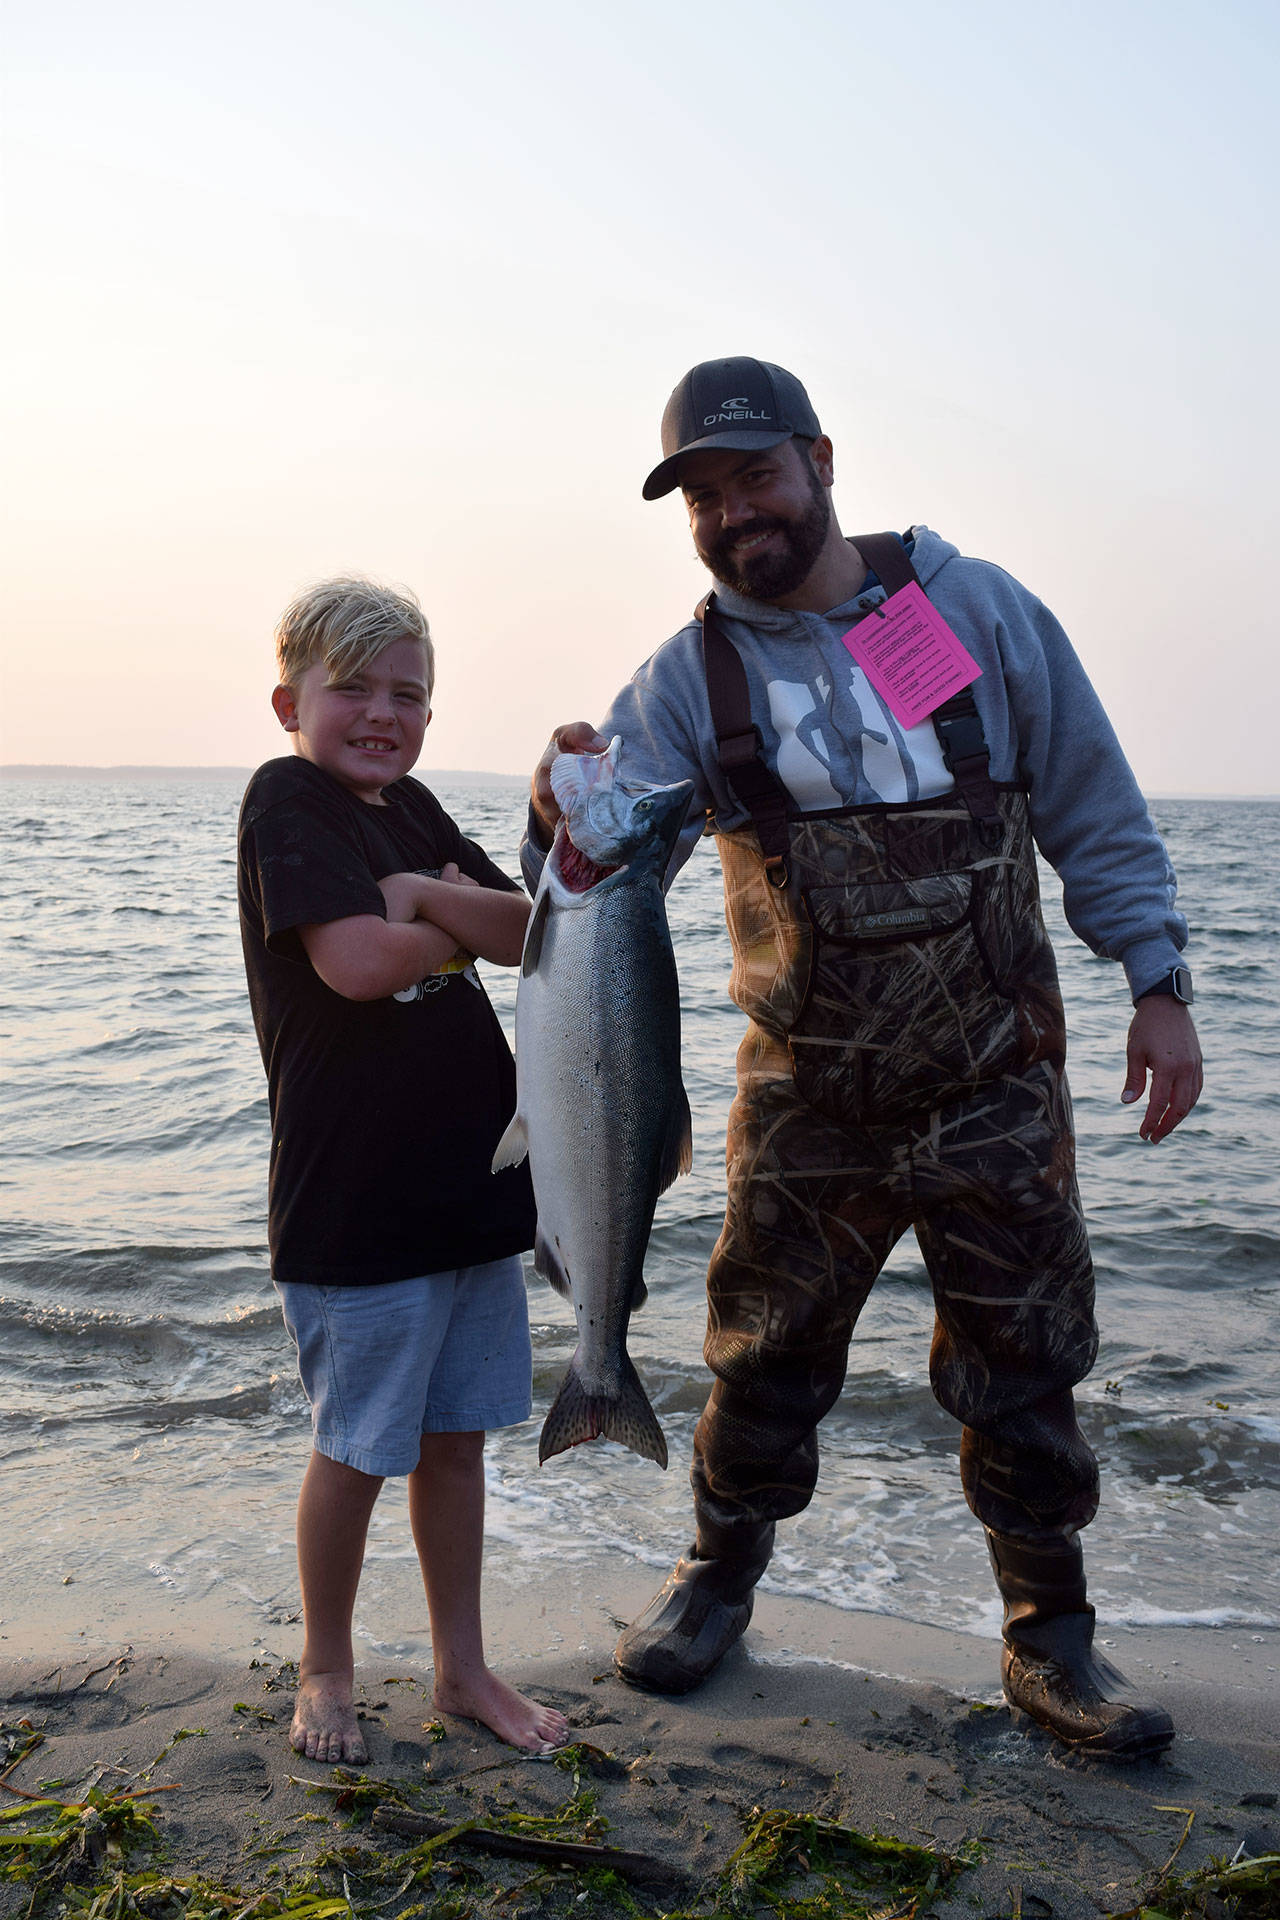 Kyle Jensen / The Record — Beckett Spjute (left) and Alex Spjute (right), visiting from California, hold up Beckett Spjute’s catch. The Spjute family’s friend from Seattle took them fishing at Bush Point Thursday evening.